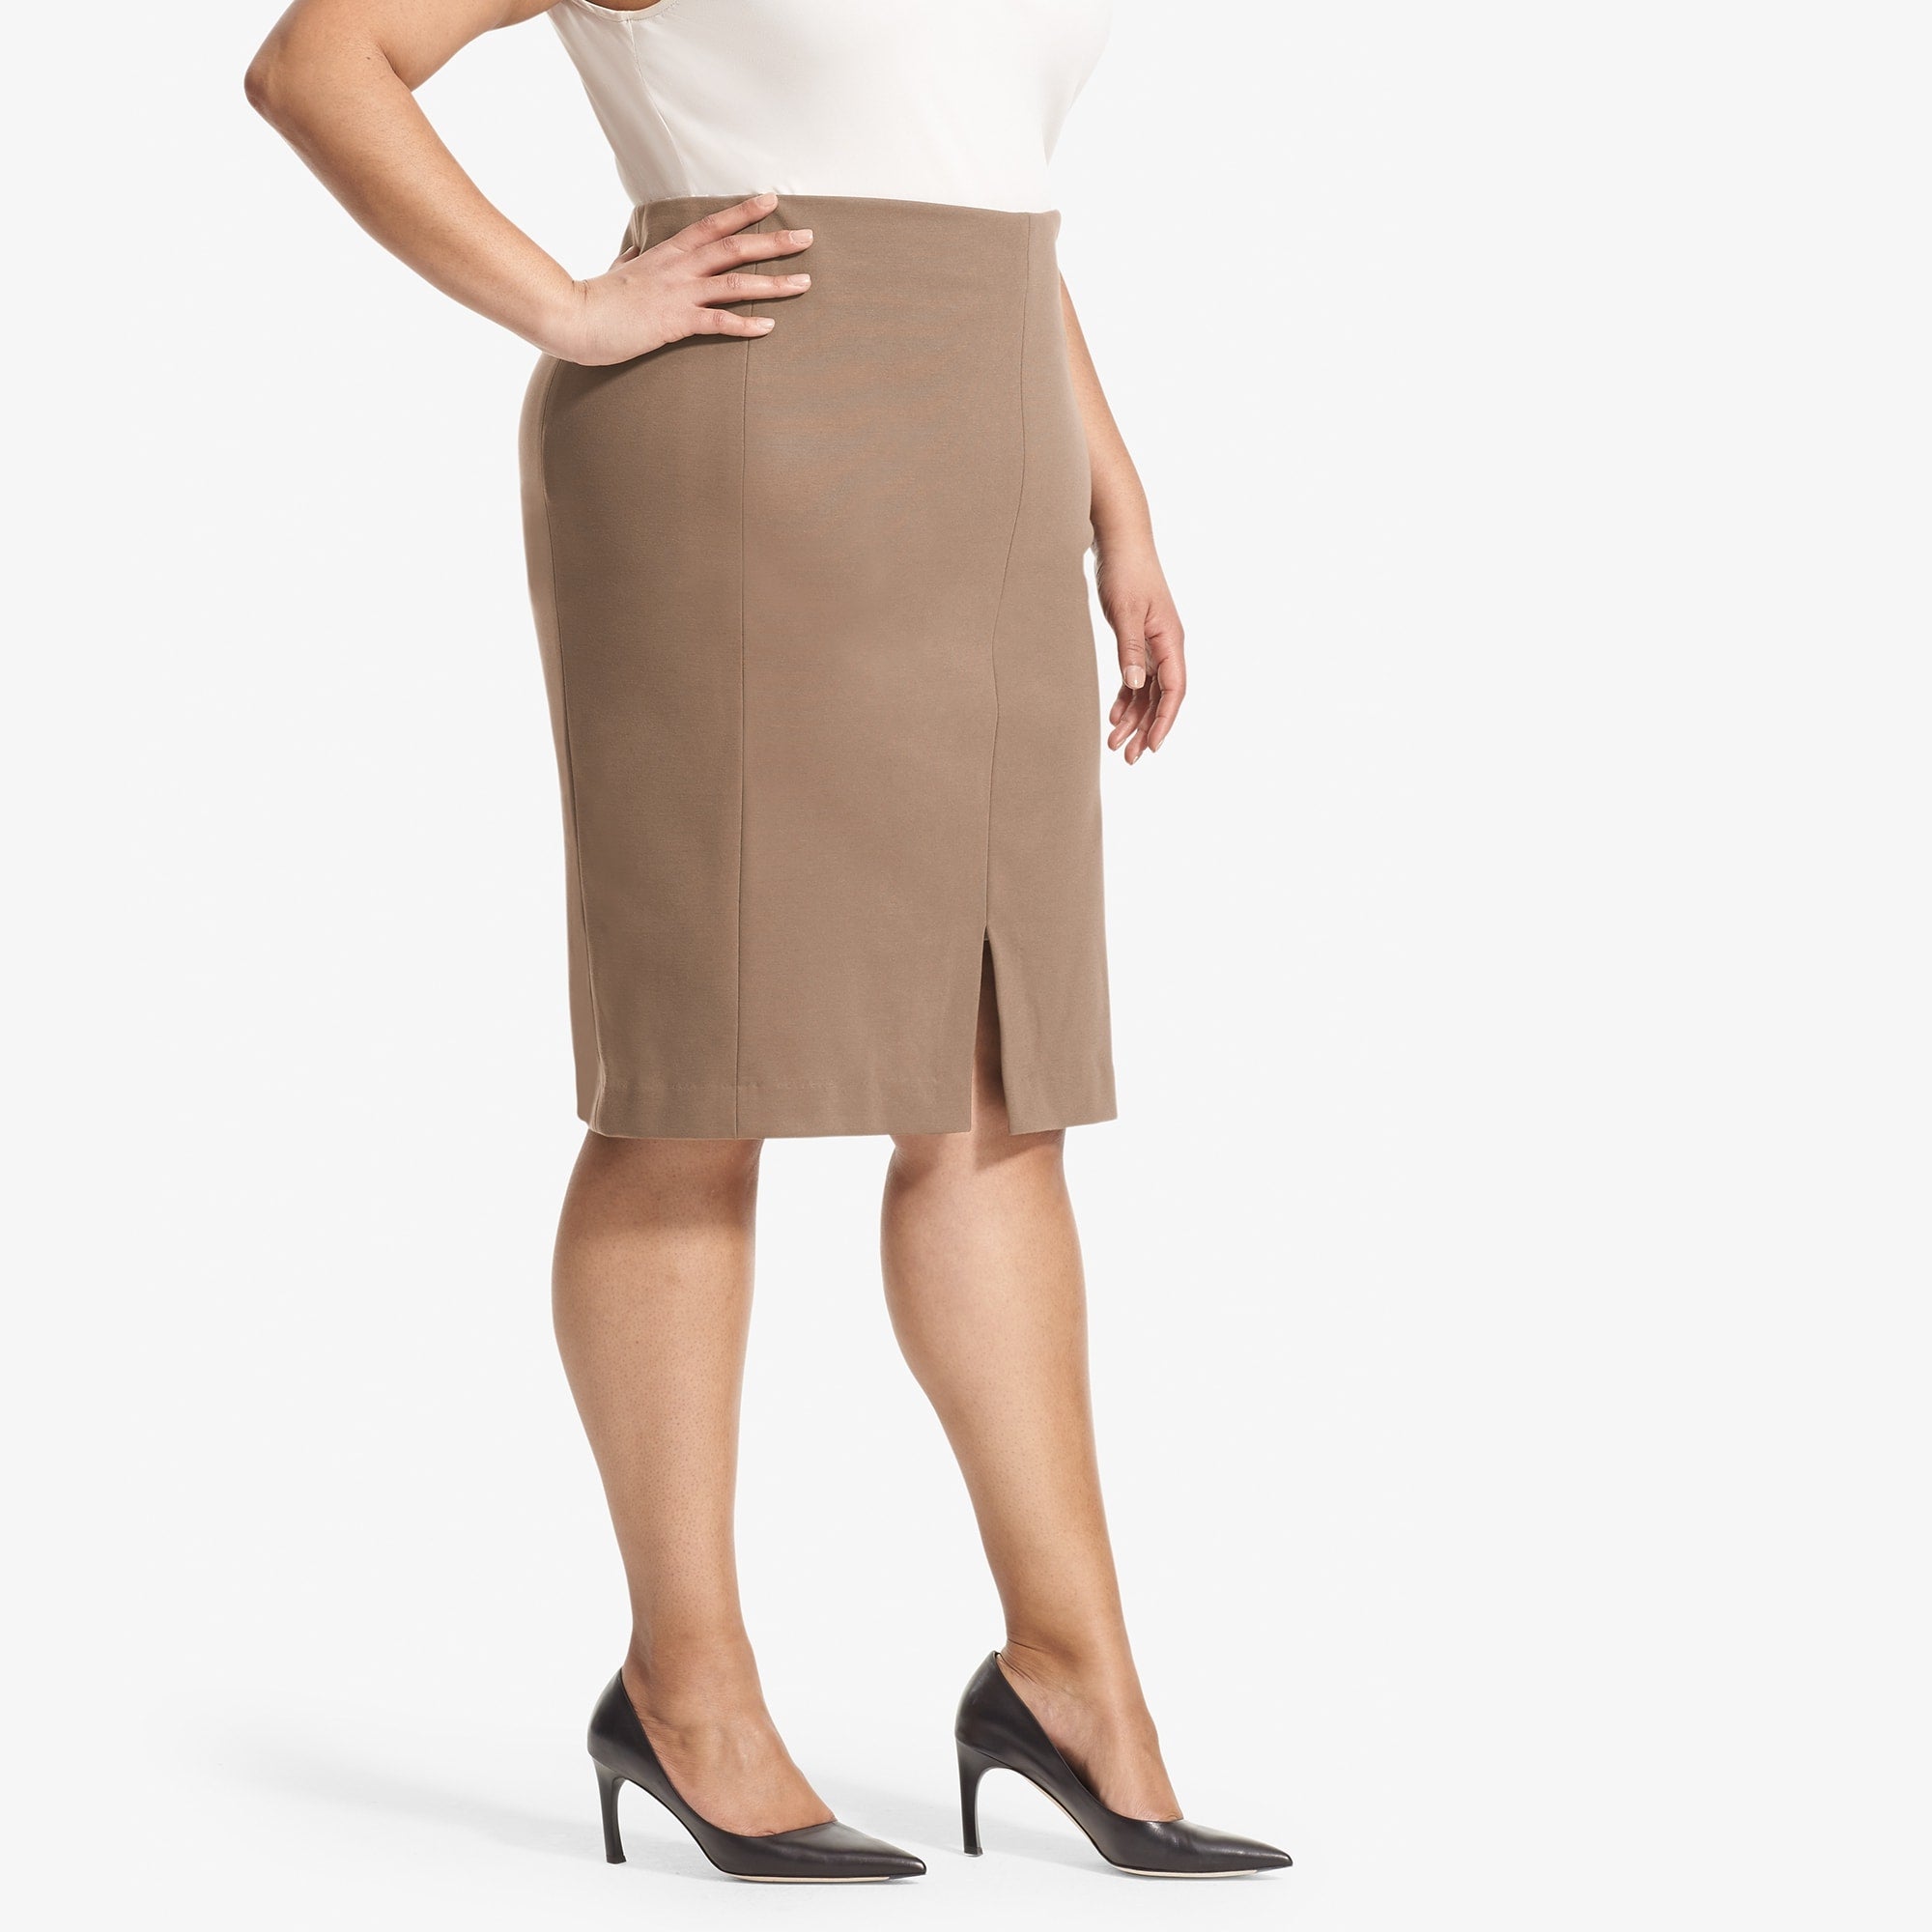 On the Go with M.M. LaFleur - That Pencil Skirt